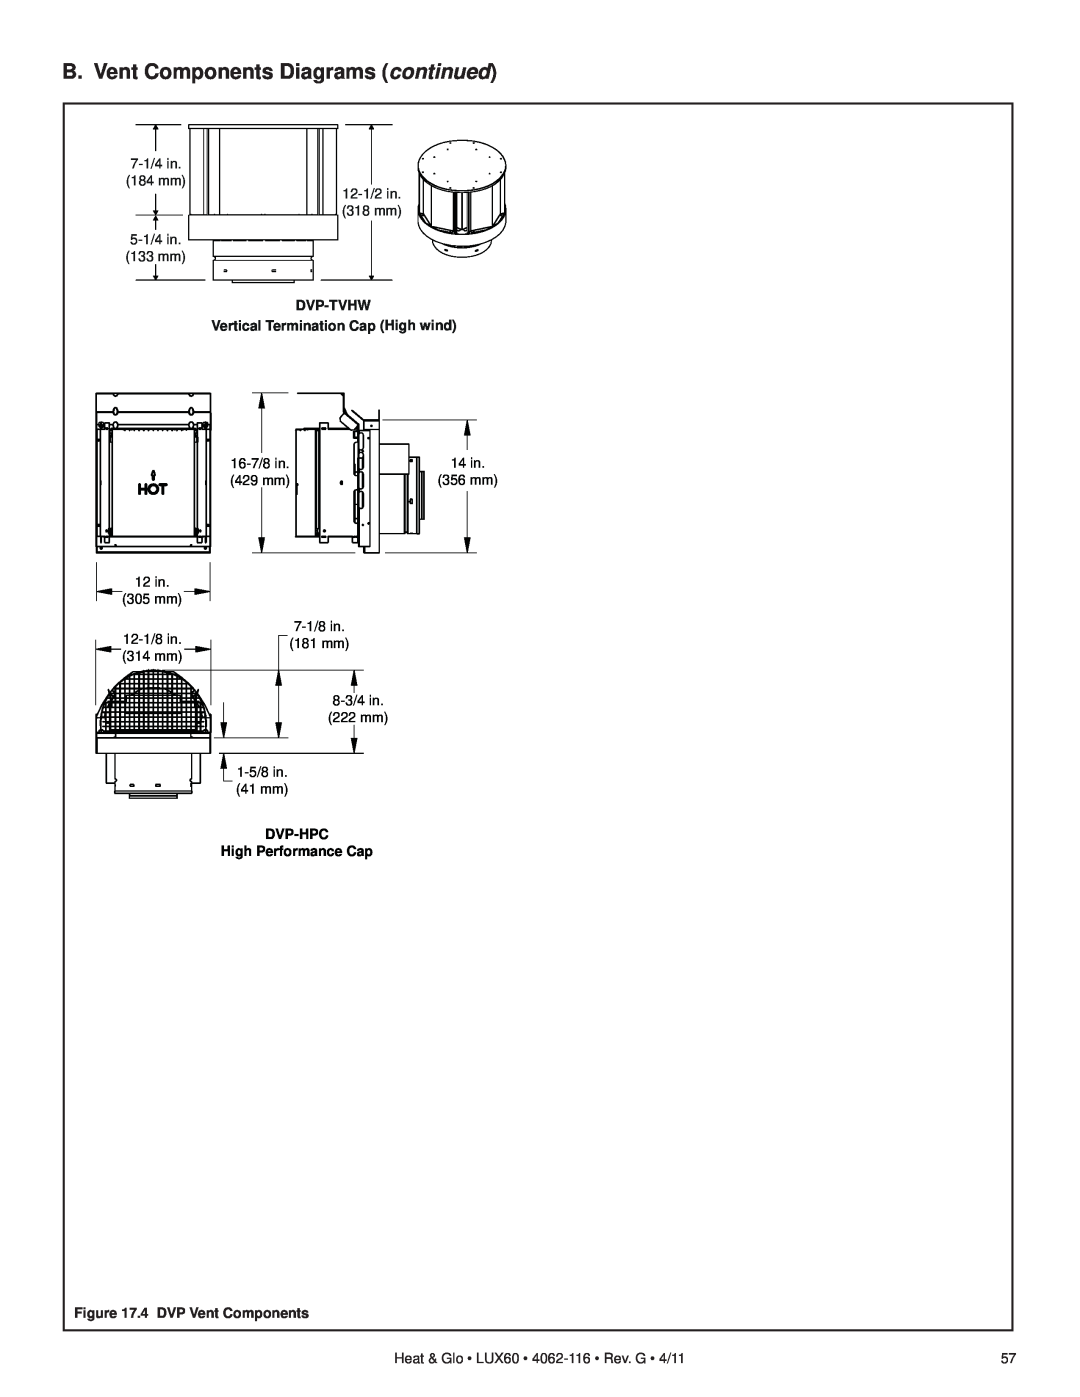 Heat & Glo LifeStyle LUX60 owner manual B. Vent Components Diagrams continued, DVP-TVHW Vertical Termination Cap High wind 